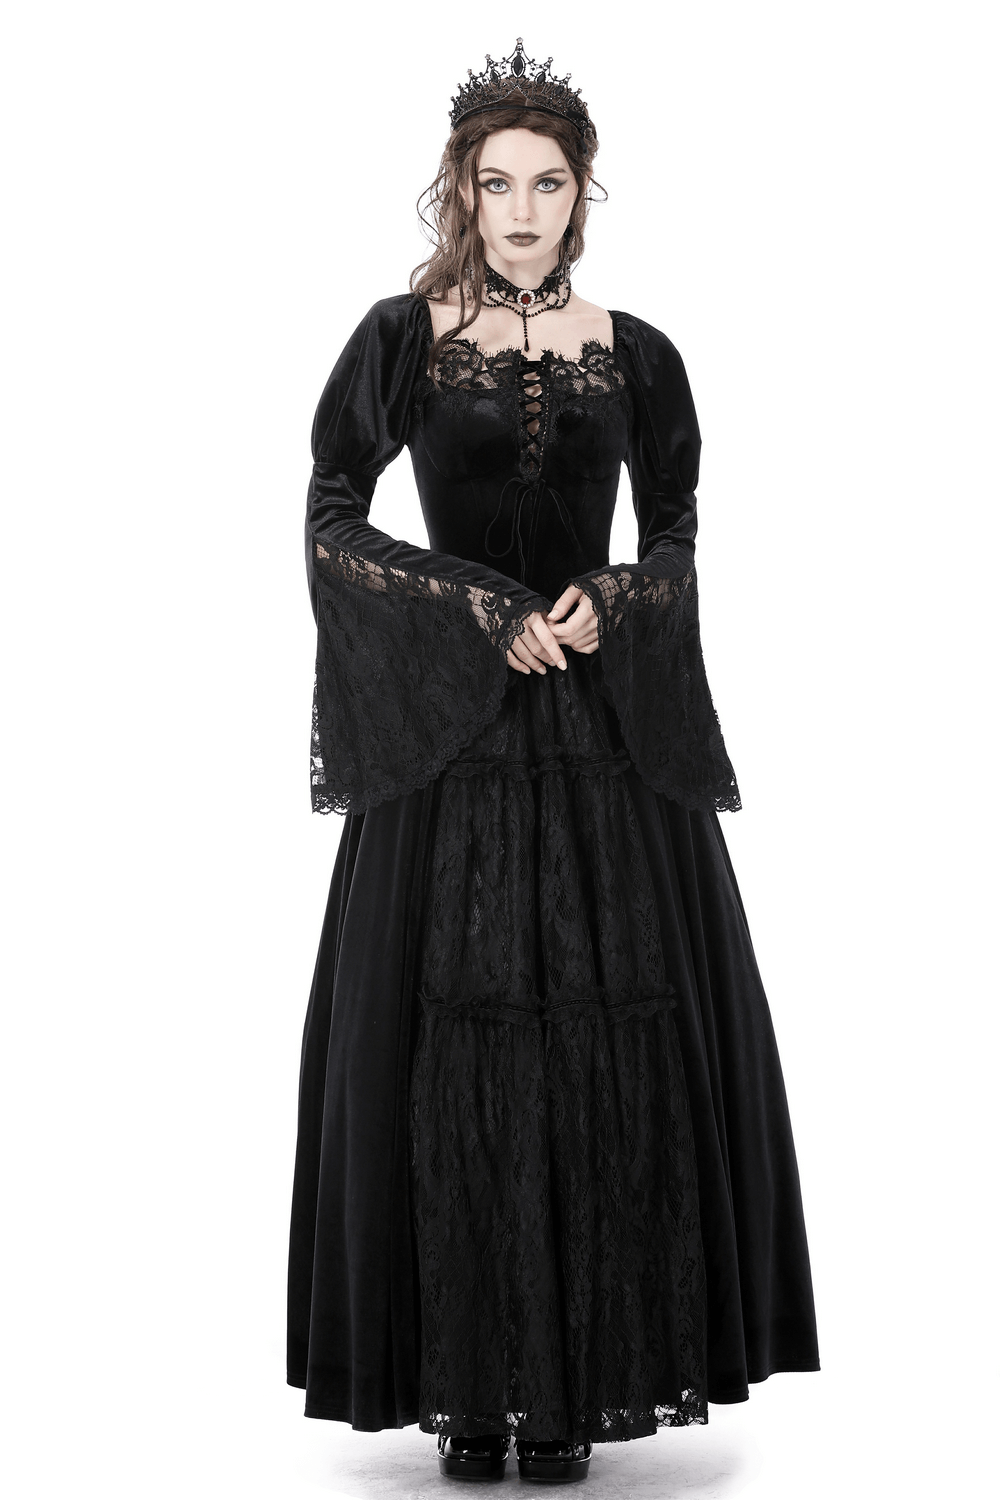 Elegant Black Lace Victorian Gown for Evening Events